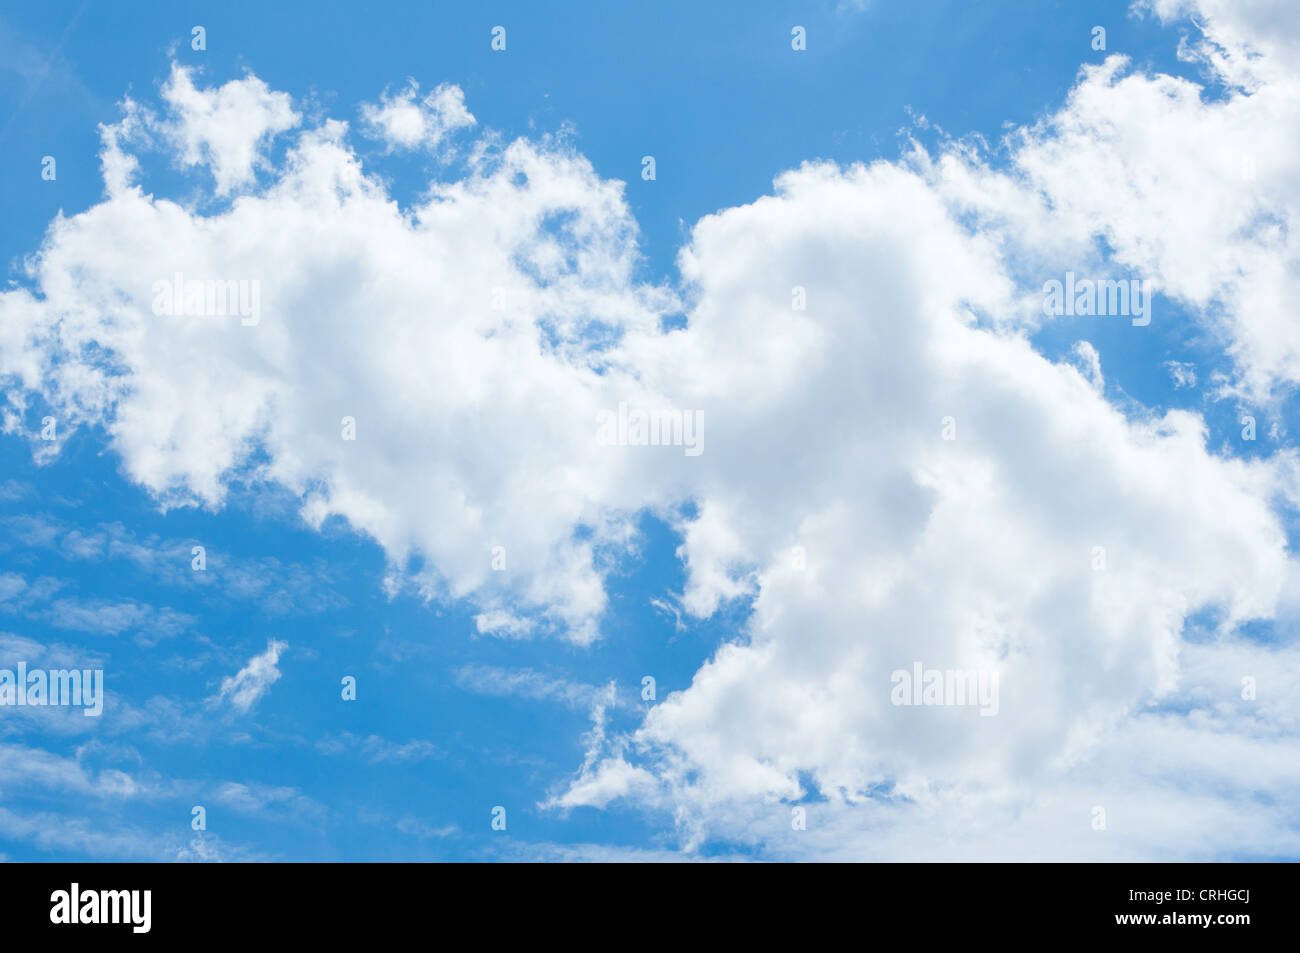 Summer blue sky with clouds Stock Photo